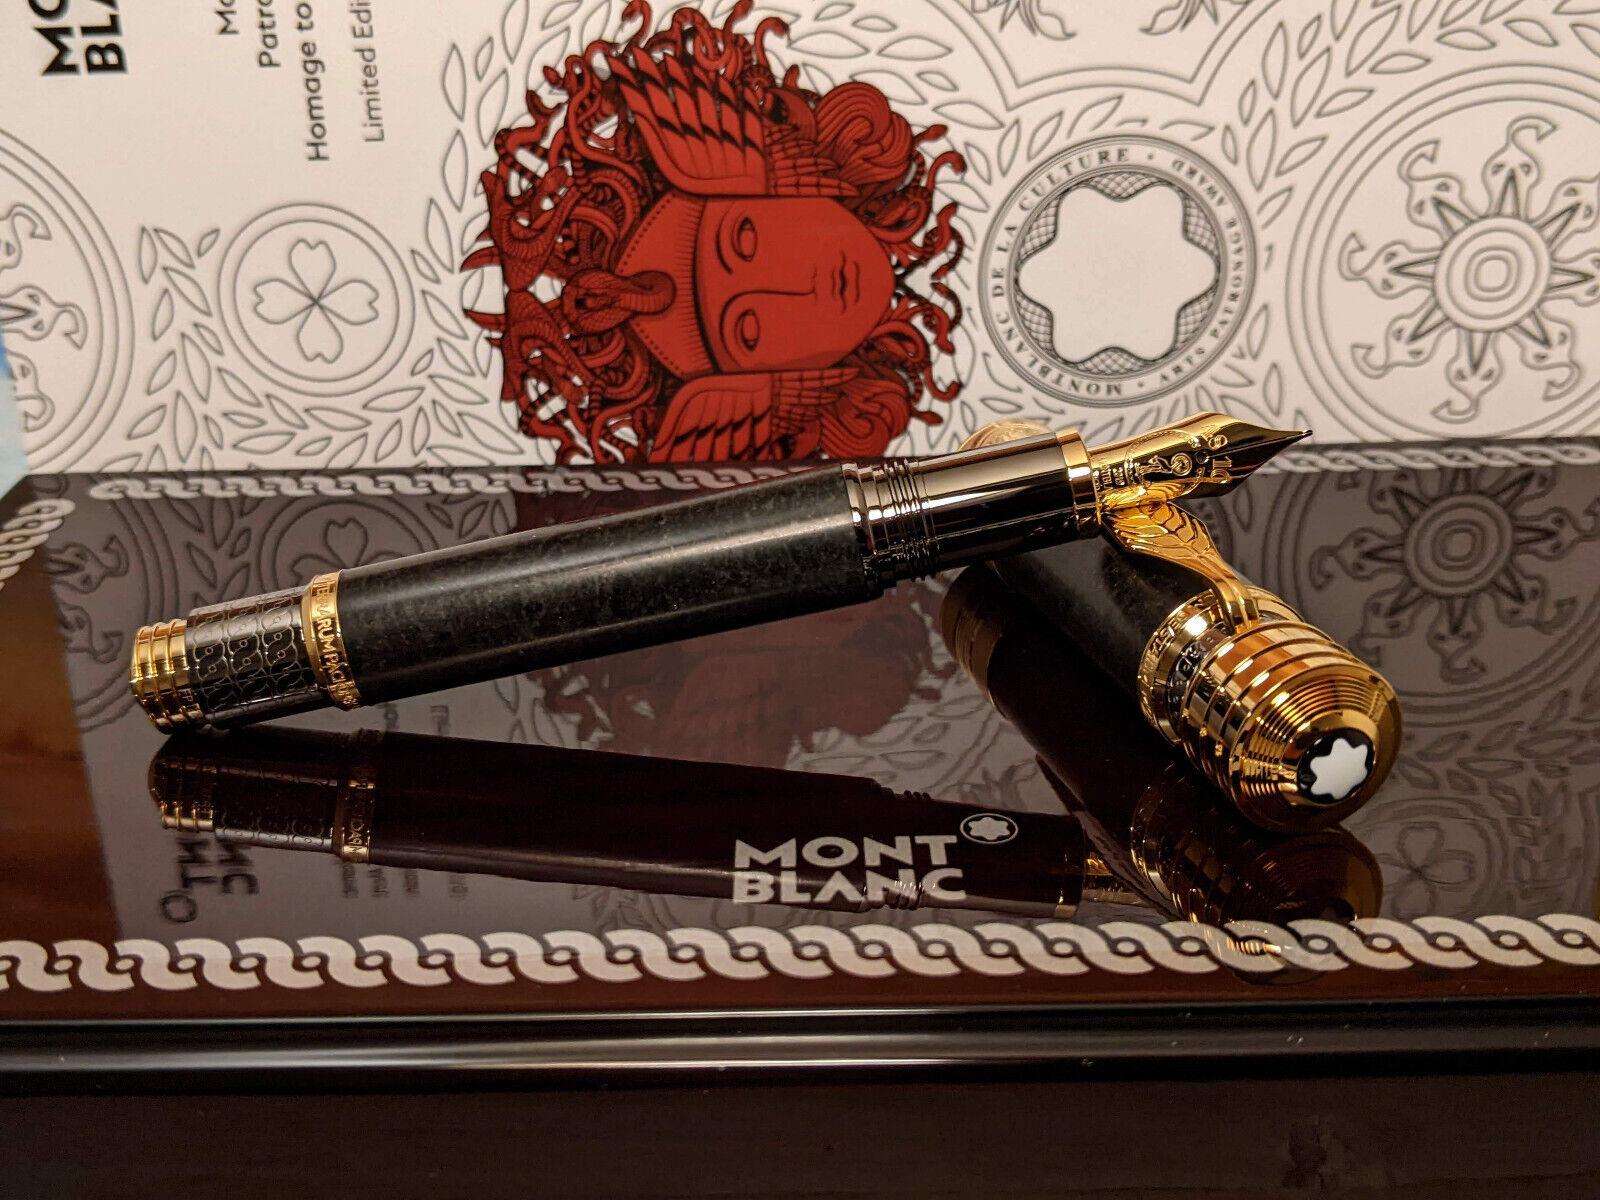 MONTBLANC Patron of Art Homage to Hadrian Limited Edition 4810 Fountain Pen